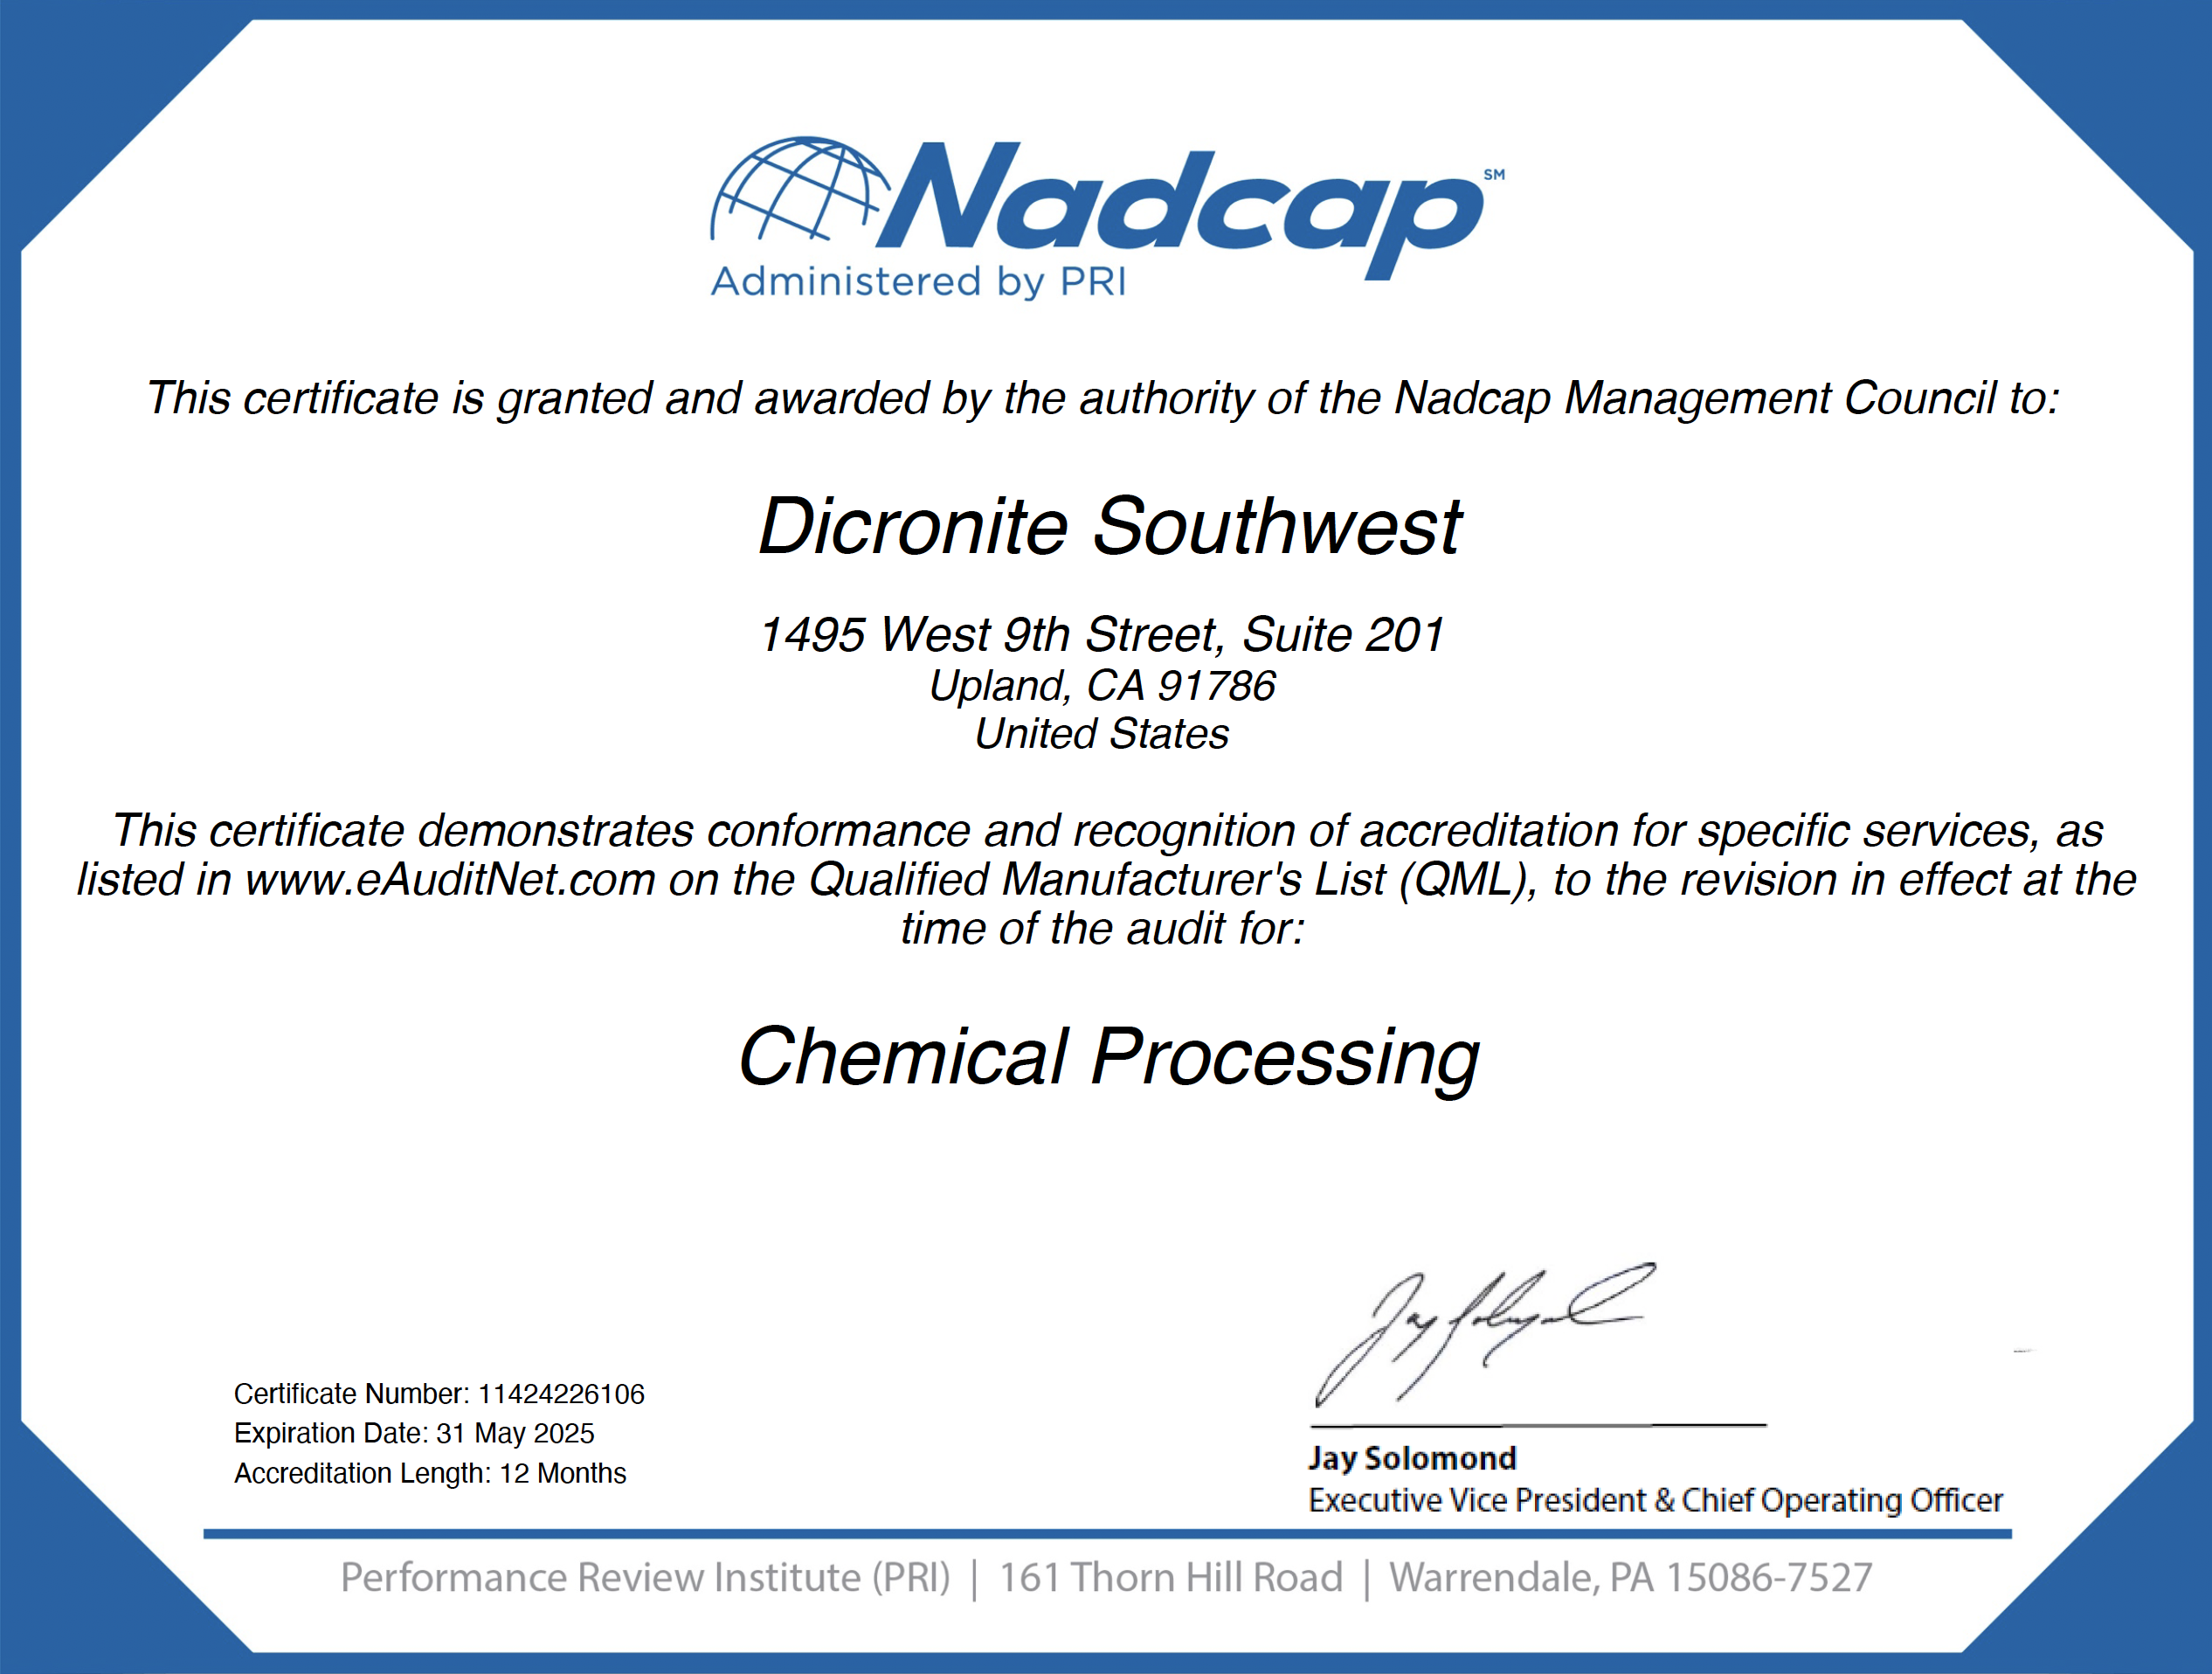 Our NADCAP Certification Renewed Until 2025!